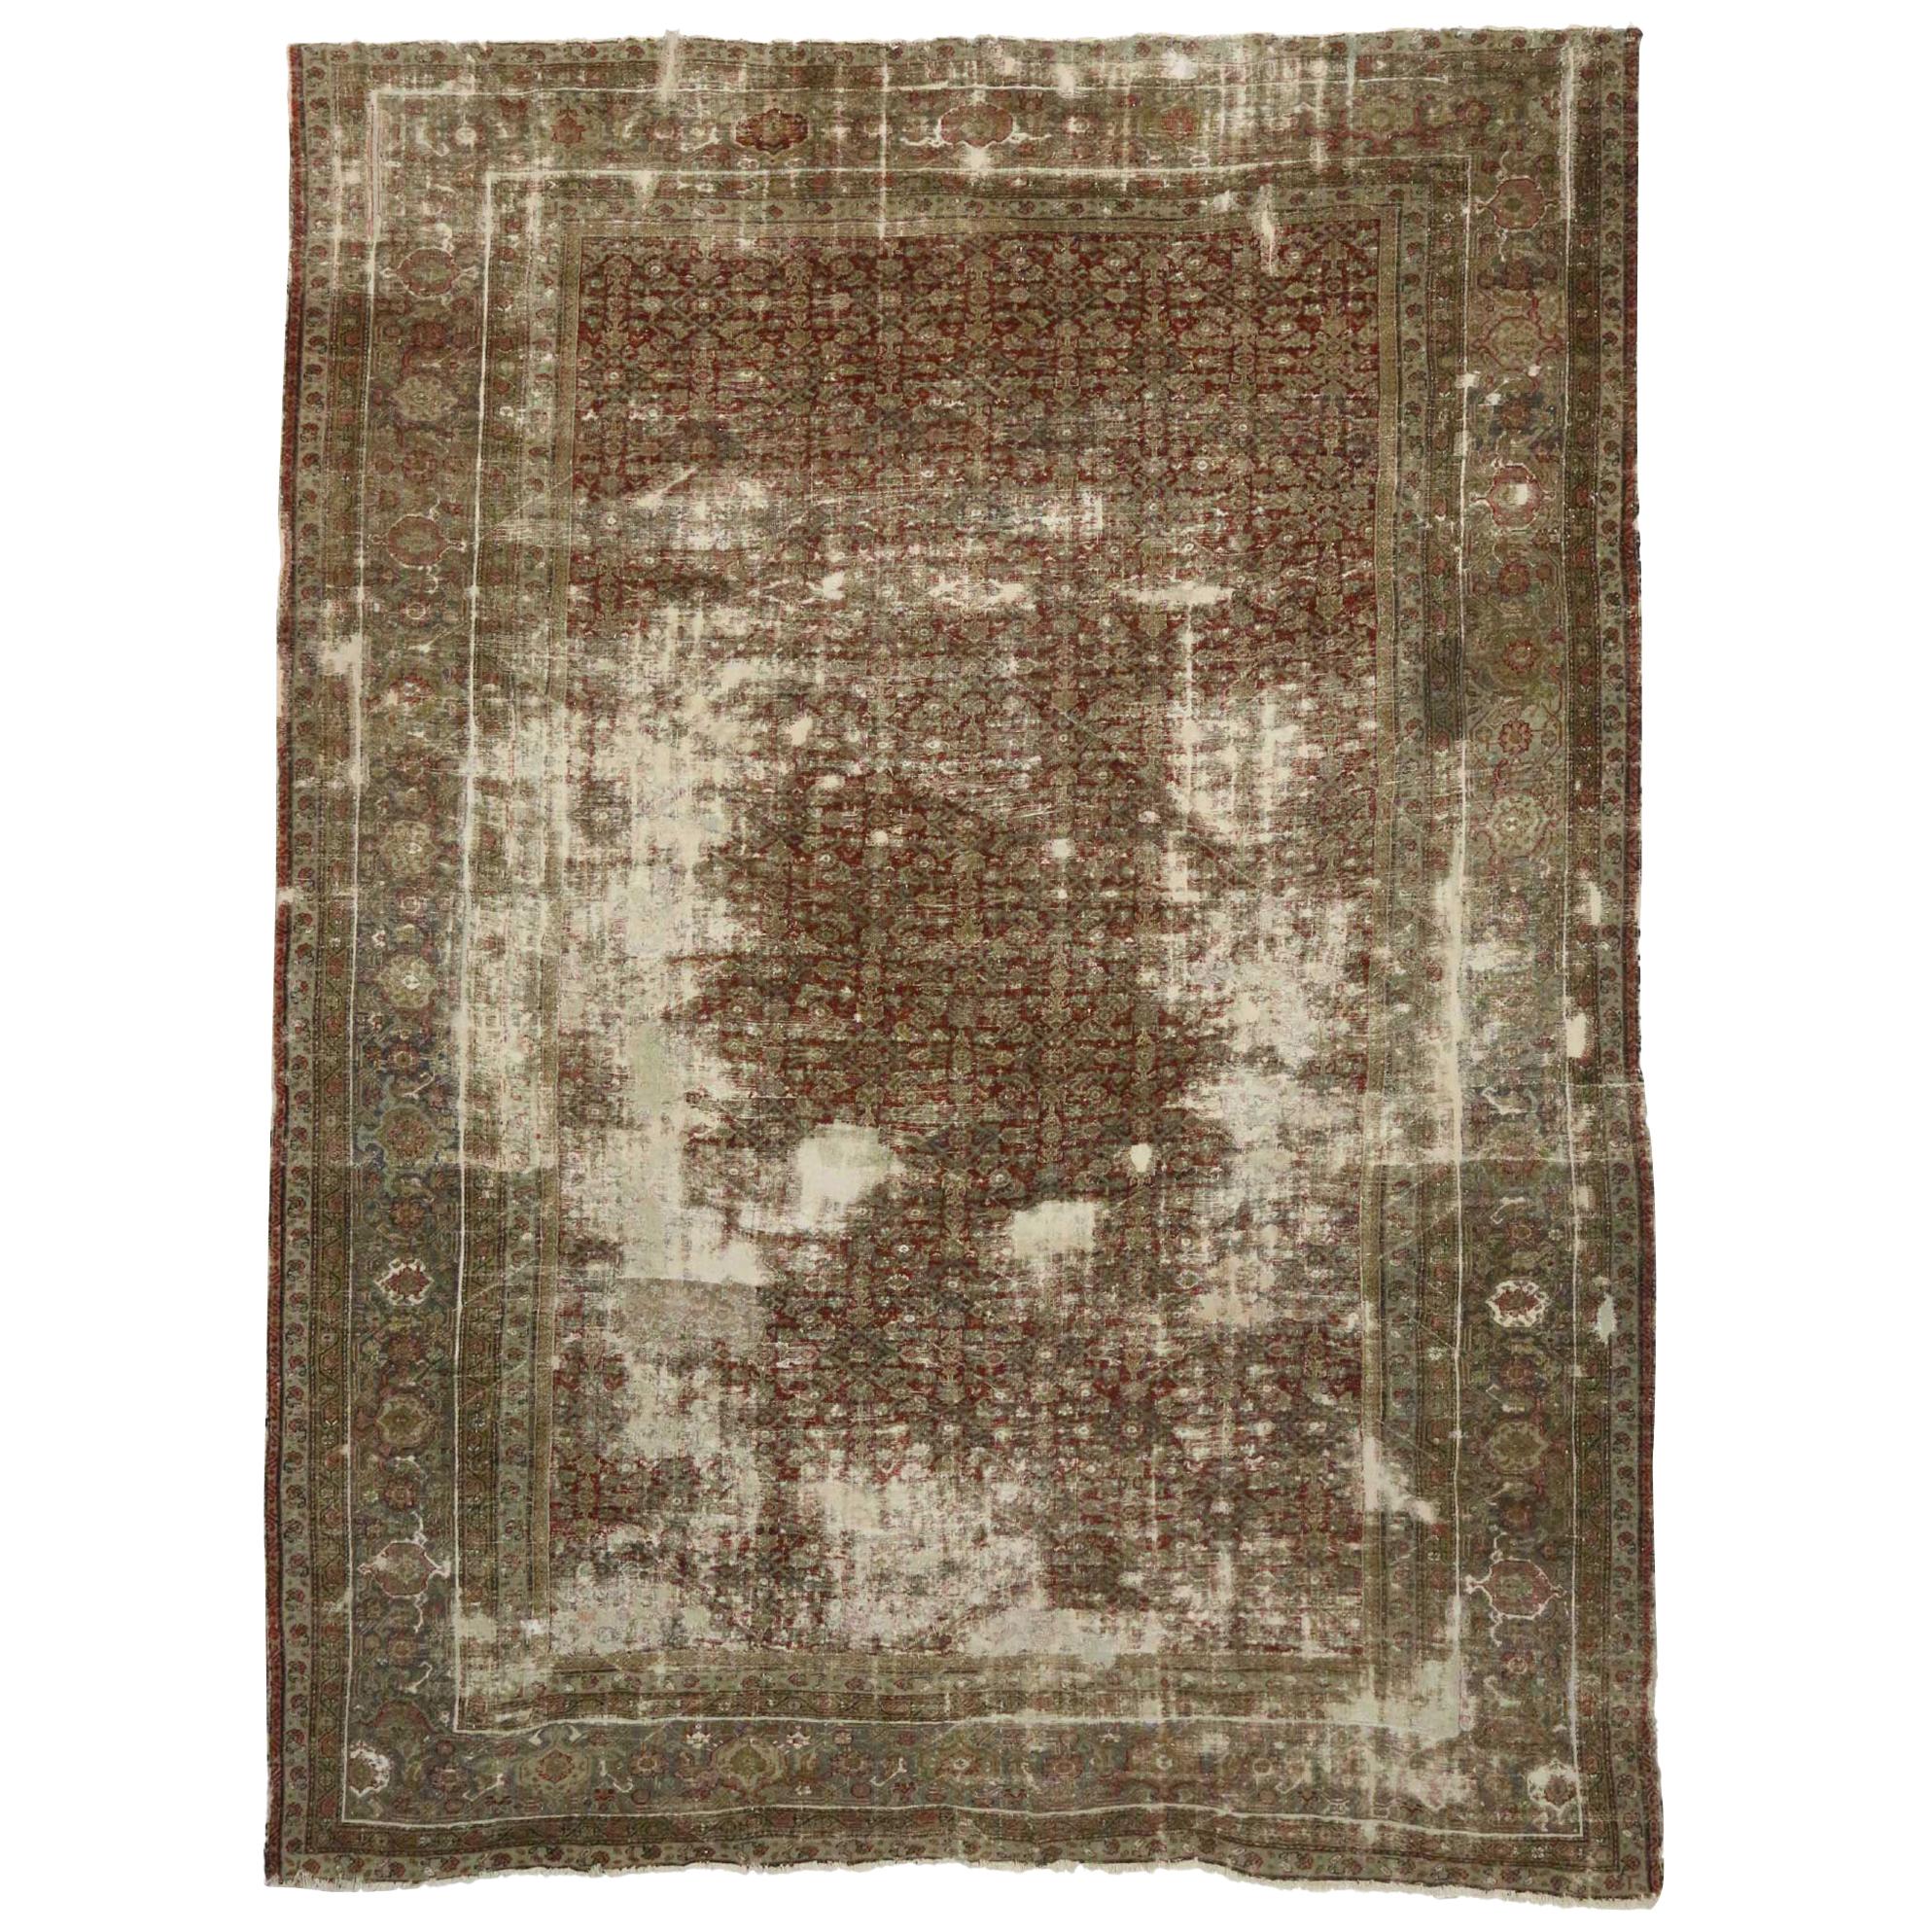 Antique-Worn Persian Sultanabad Rug, Weathered Beauty Meets Rustic Adirondack  For Sale